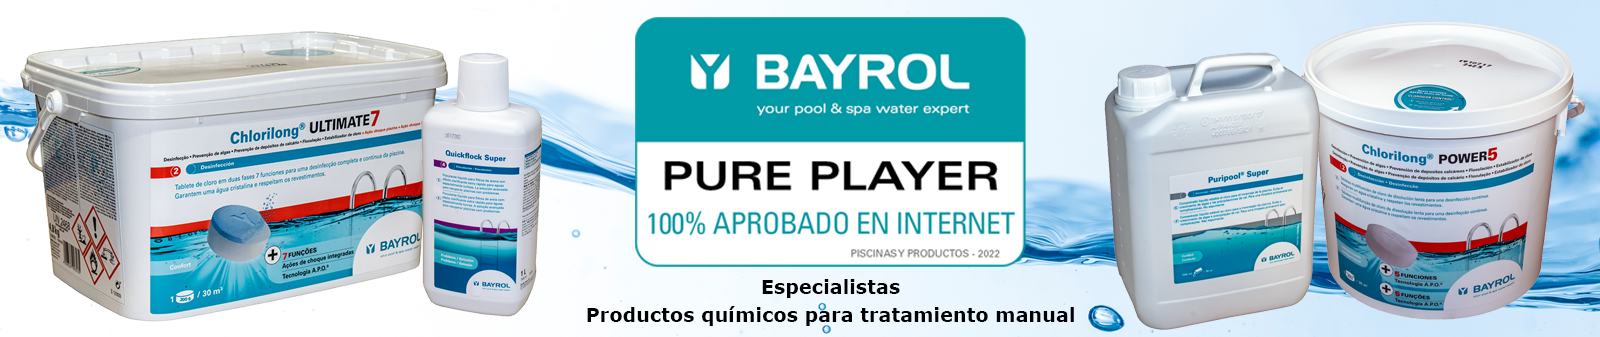 Banner-productos-quimicos-bayrol-w.png